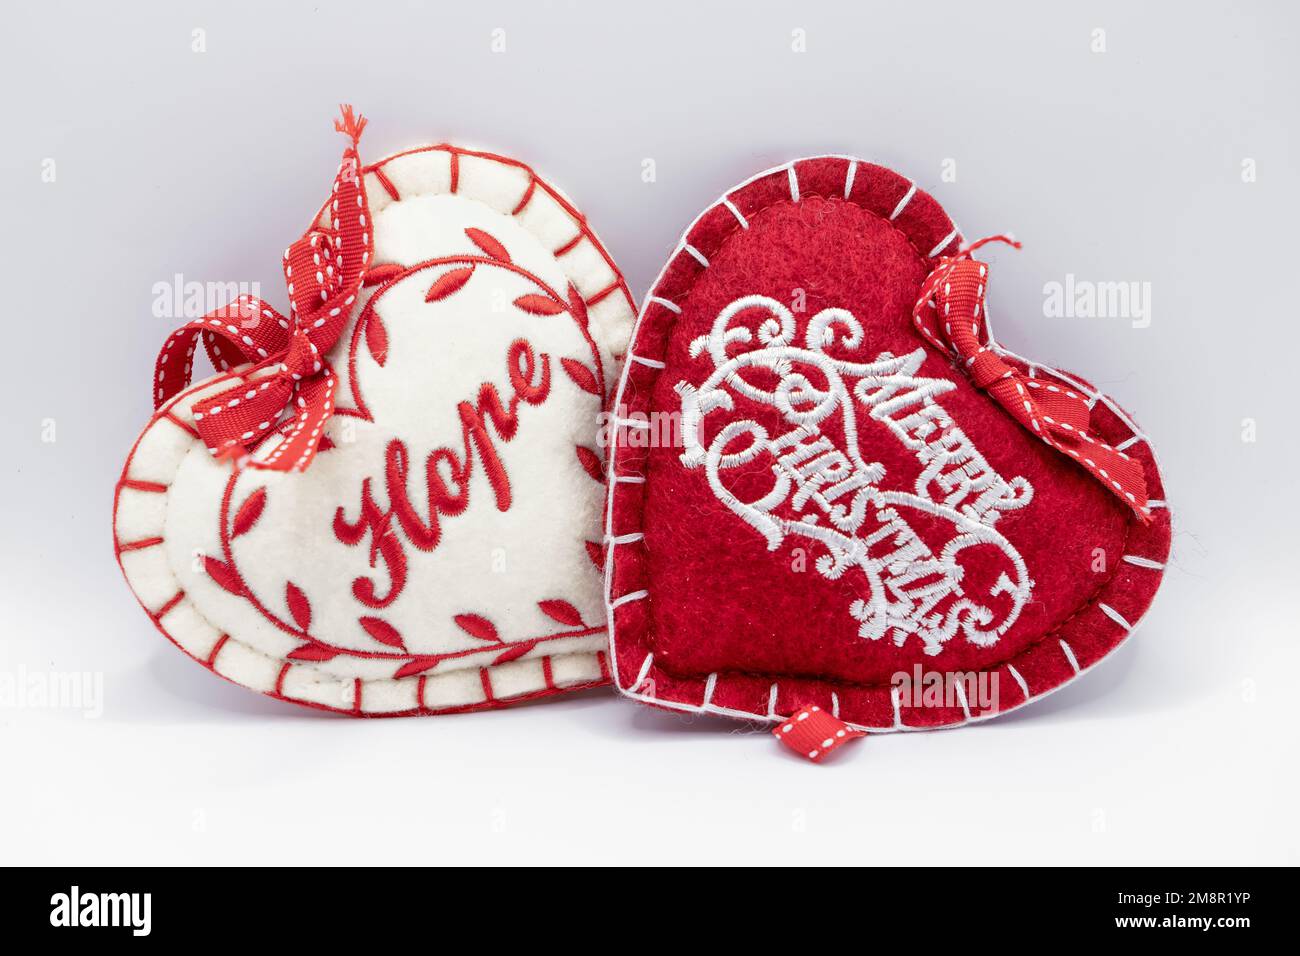 red and white heart shaped festive decorations, text of hope and merry christmas Stock Photo